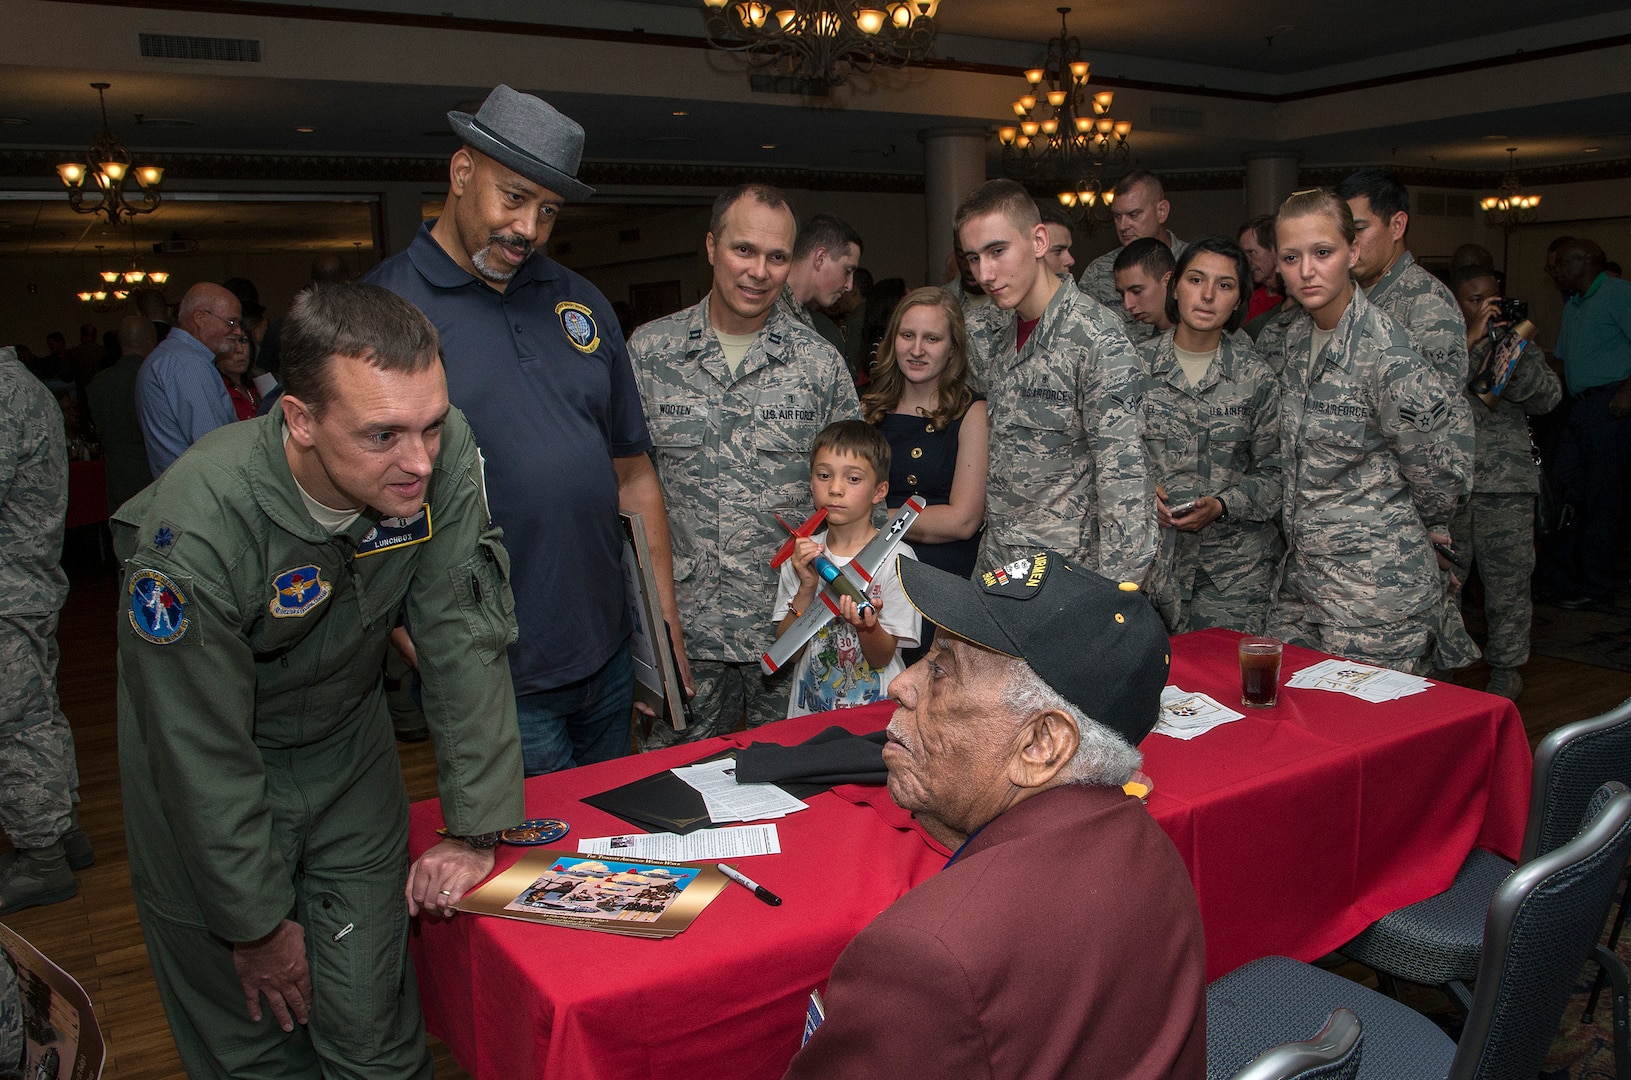 Members of the JBSA-Randolph community listen to Mr. Thomas M. Ellis, documented original Tuskegee Airmen, speak about his time serving with the Tuskegee Airmen during the Tuskegee Airmen Tribute, June 12, 2015, at Joint Base San Antonio-Randolph’s Parr Club.  Members of the JBSA-Randolph community celebrated the legacy of the first all-black unit by paying tribute to seven of the documented original Tuskegee Airmen members.  The Tuskegee Airmen distinguished themselves during World War II with more than 15,500 sorties and 1,500 missions in Europe and North Africa and earned numerous combat awards.  The event featured musical entertainment, comments by 12th Flying Training Wing leaders, an introduction of four Tuskegee Airmen present and a presentation of gifts to them. Members of the audience had an opportunity to mingle with the Tuskegee Airmen and listen to their stories. (U.S. Air Force photo by Johnny Saldivar/released)